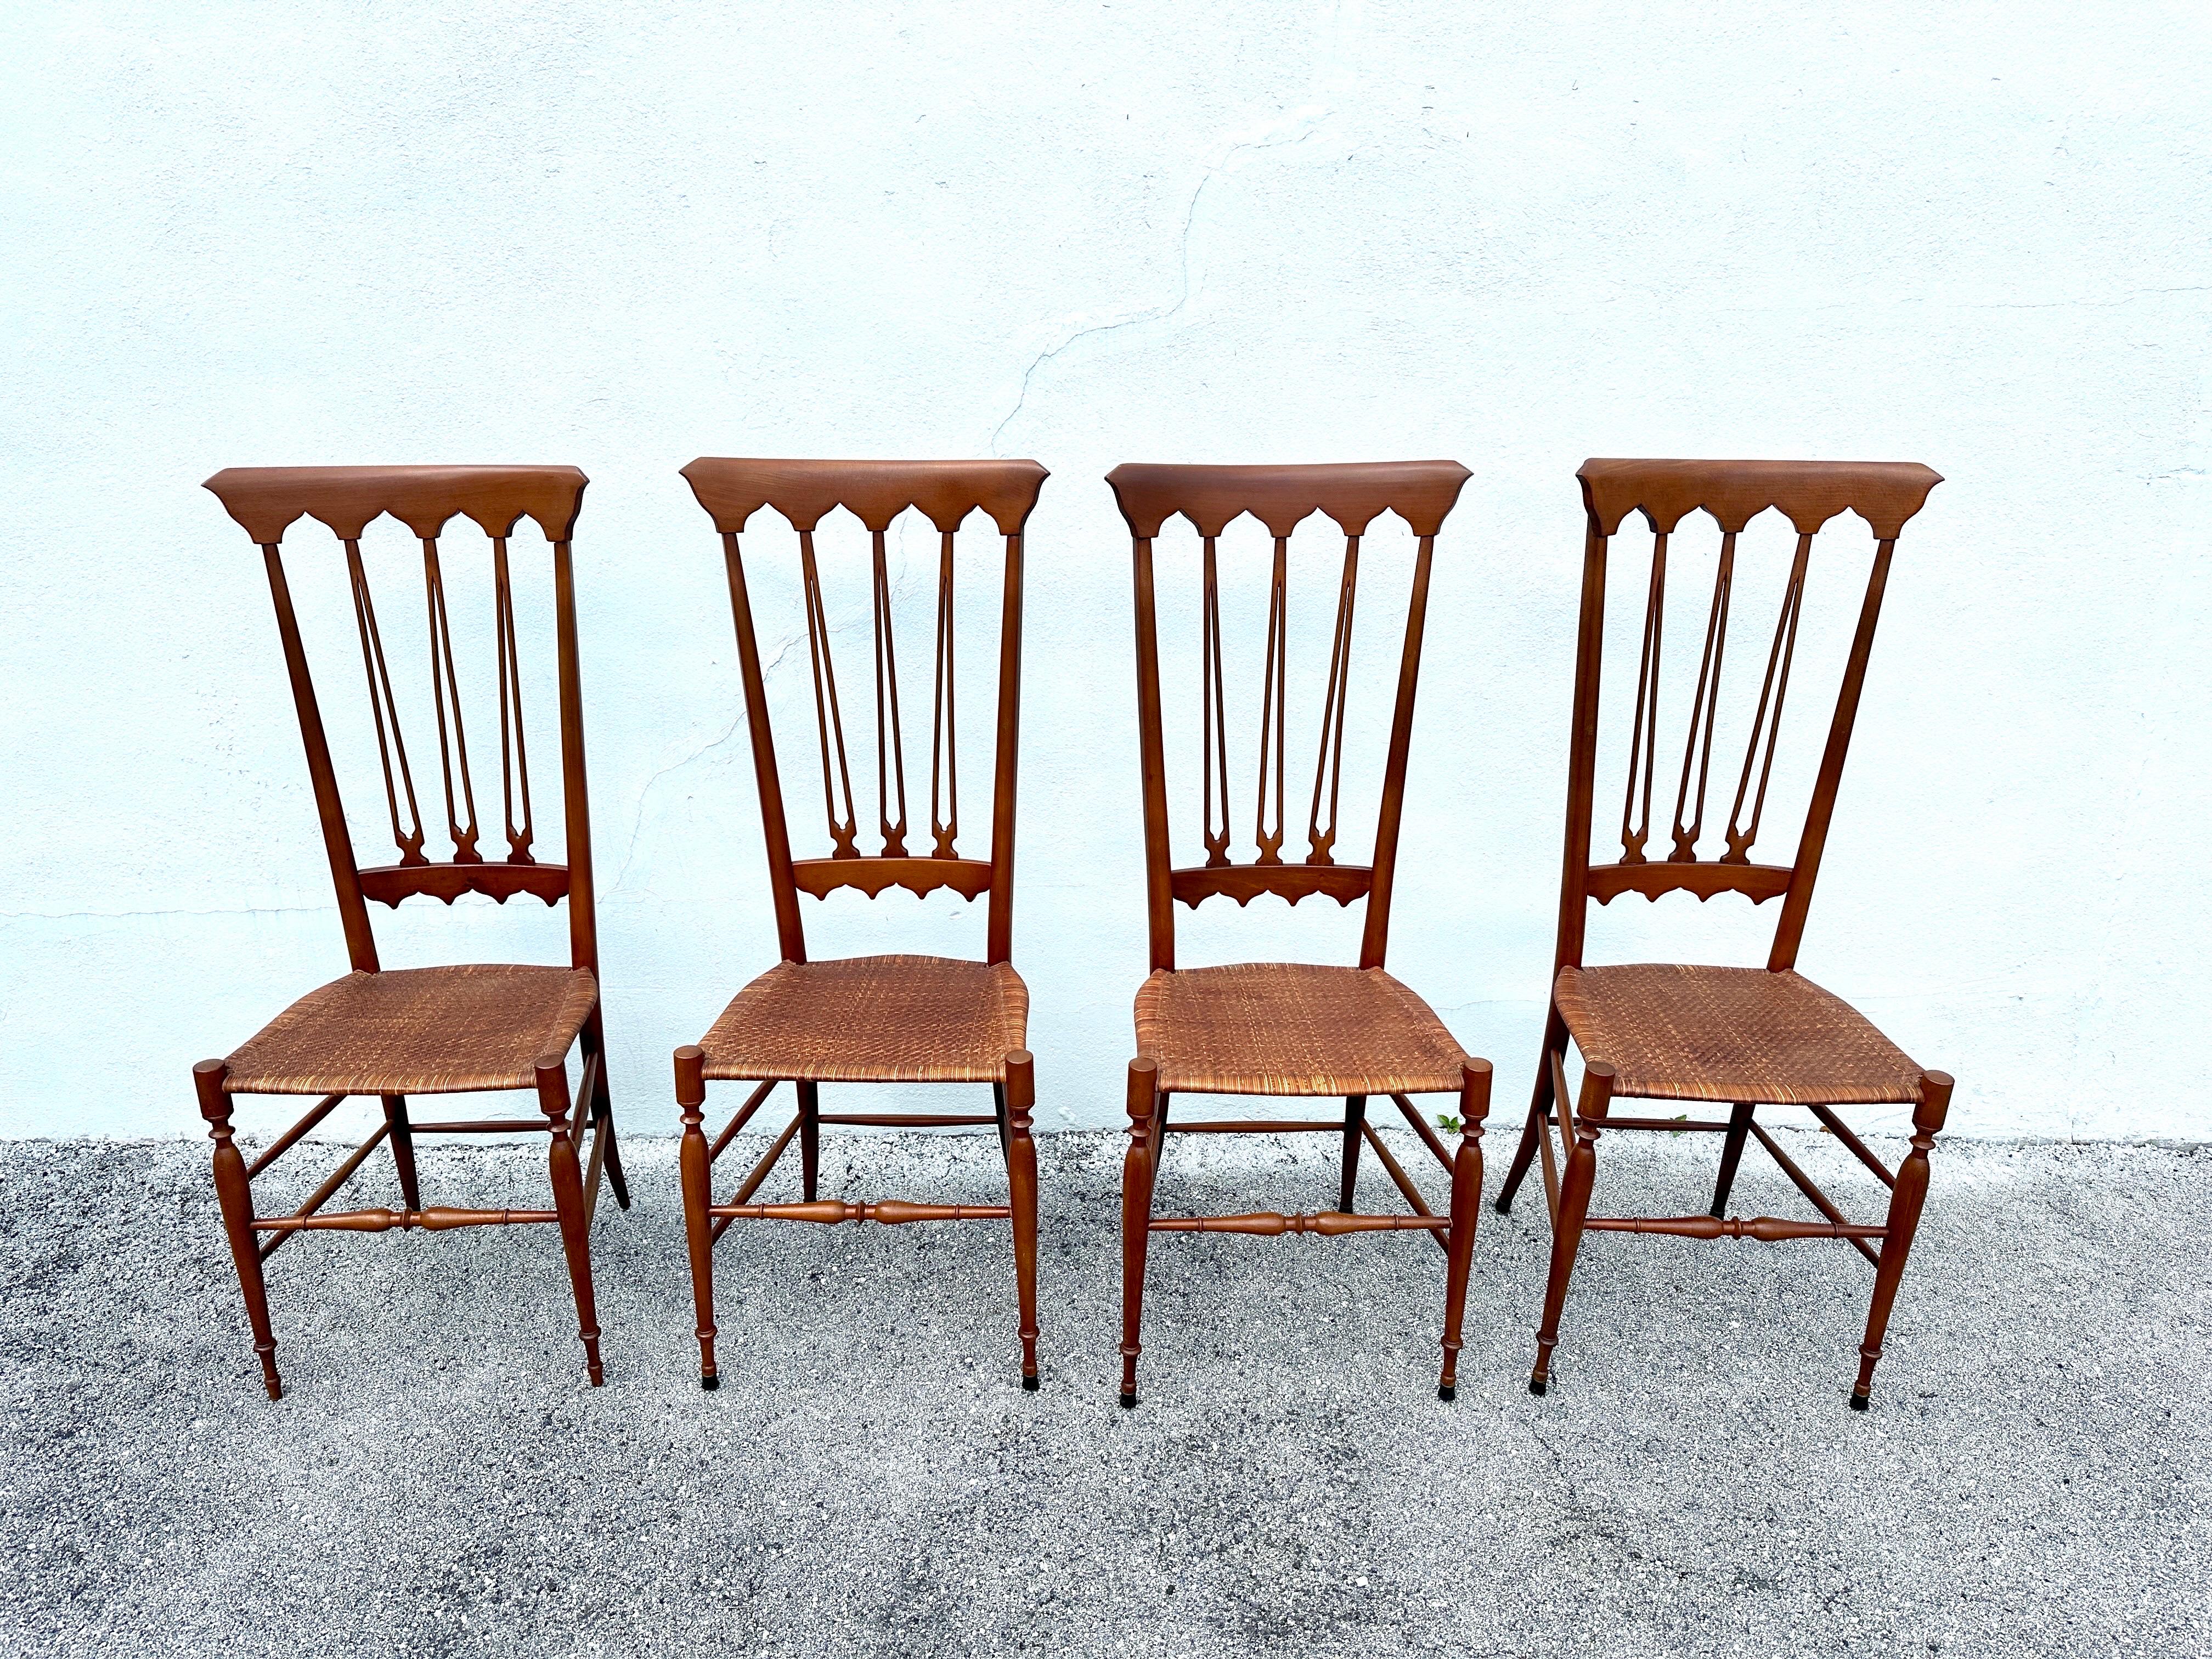 Mobili Sanguineti Chiavari - Set of Four (4) Wood and Wicker Chairs In Good Condition For Sale In East Hampton, NY